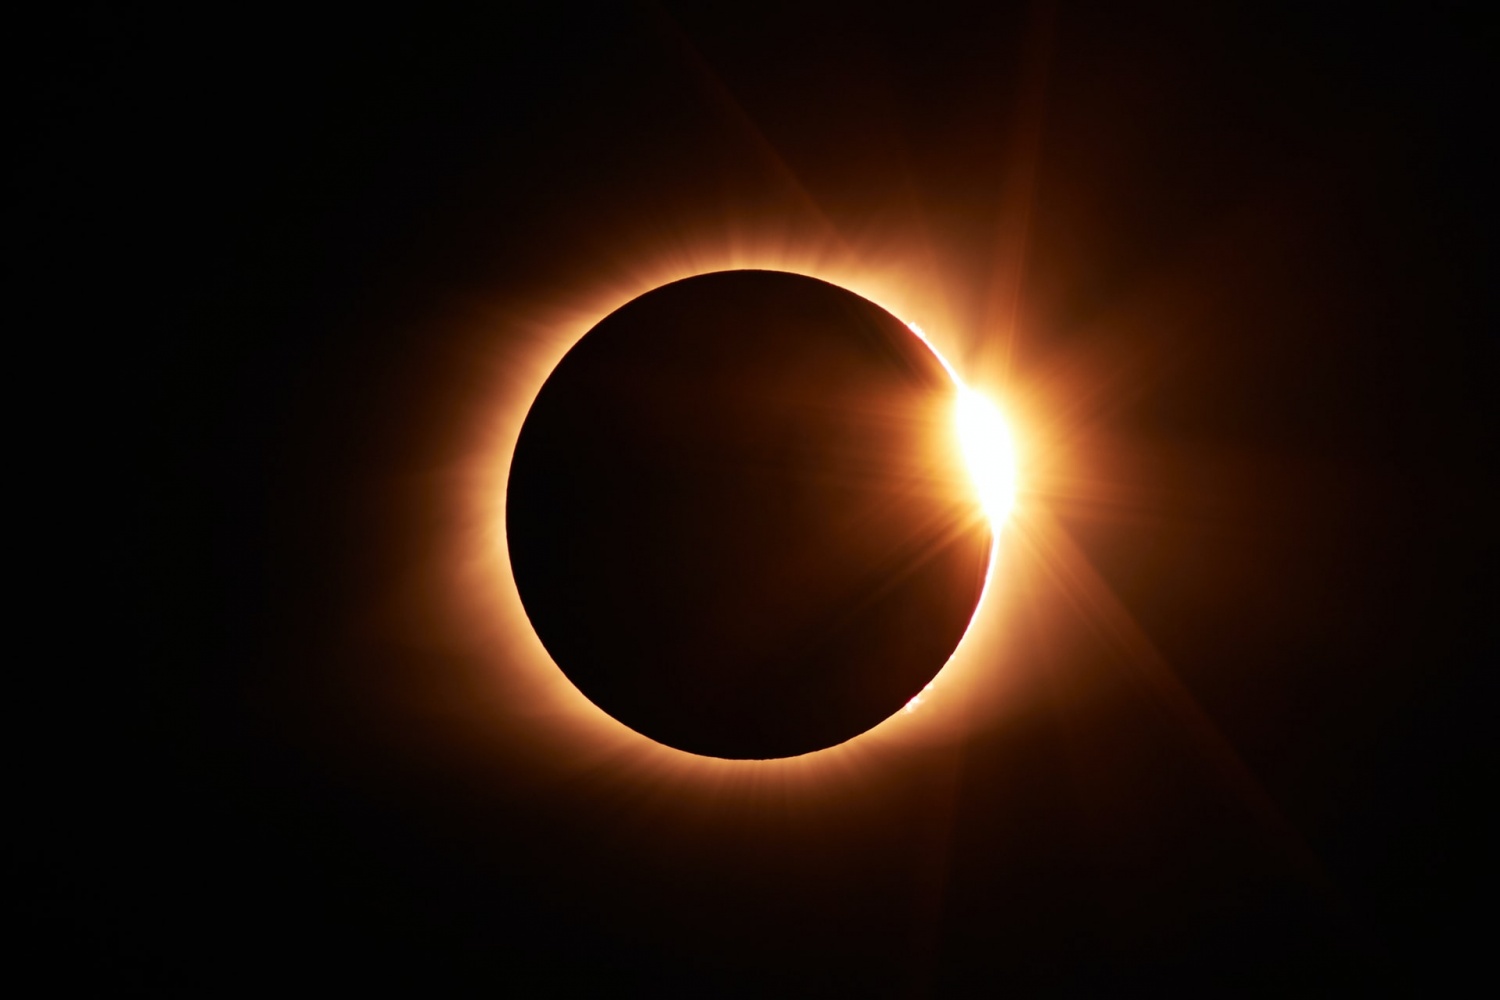 NASA Says 'Ring of Fire' Solar Eclipse to be Viewable in Select Regions--How to Watch Safely watch it on June 10?                                                                                       